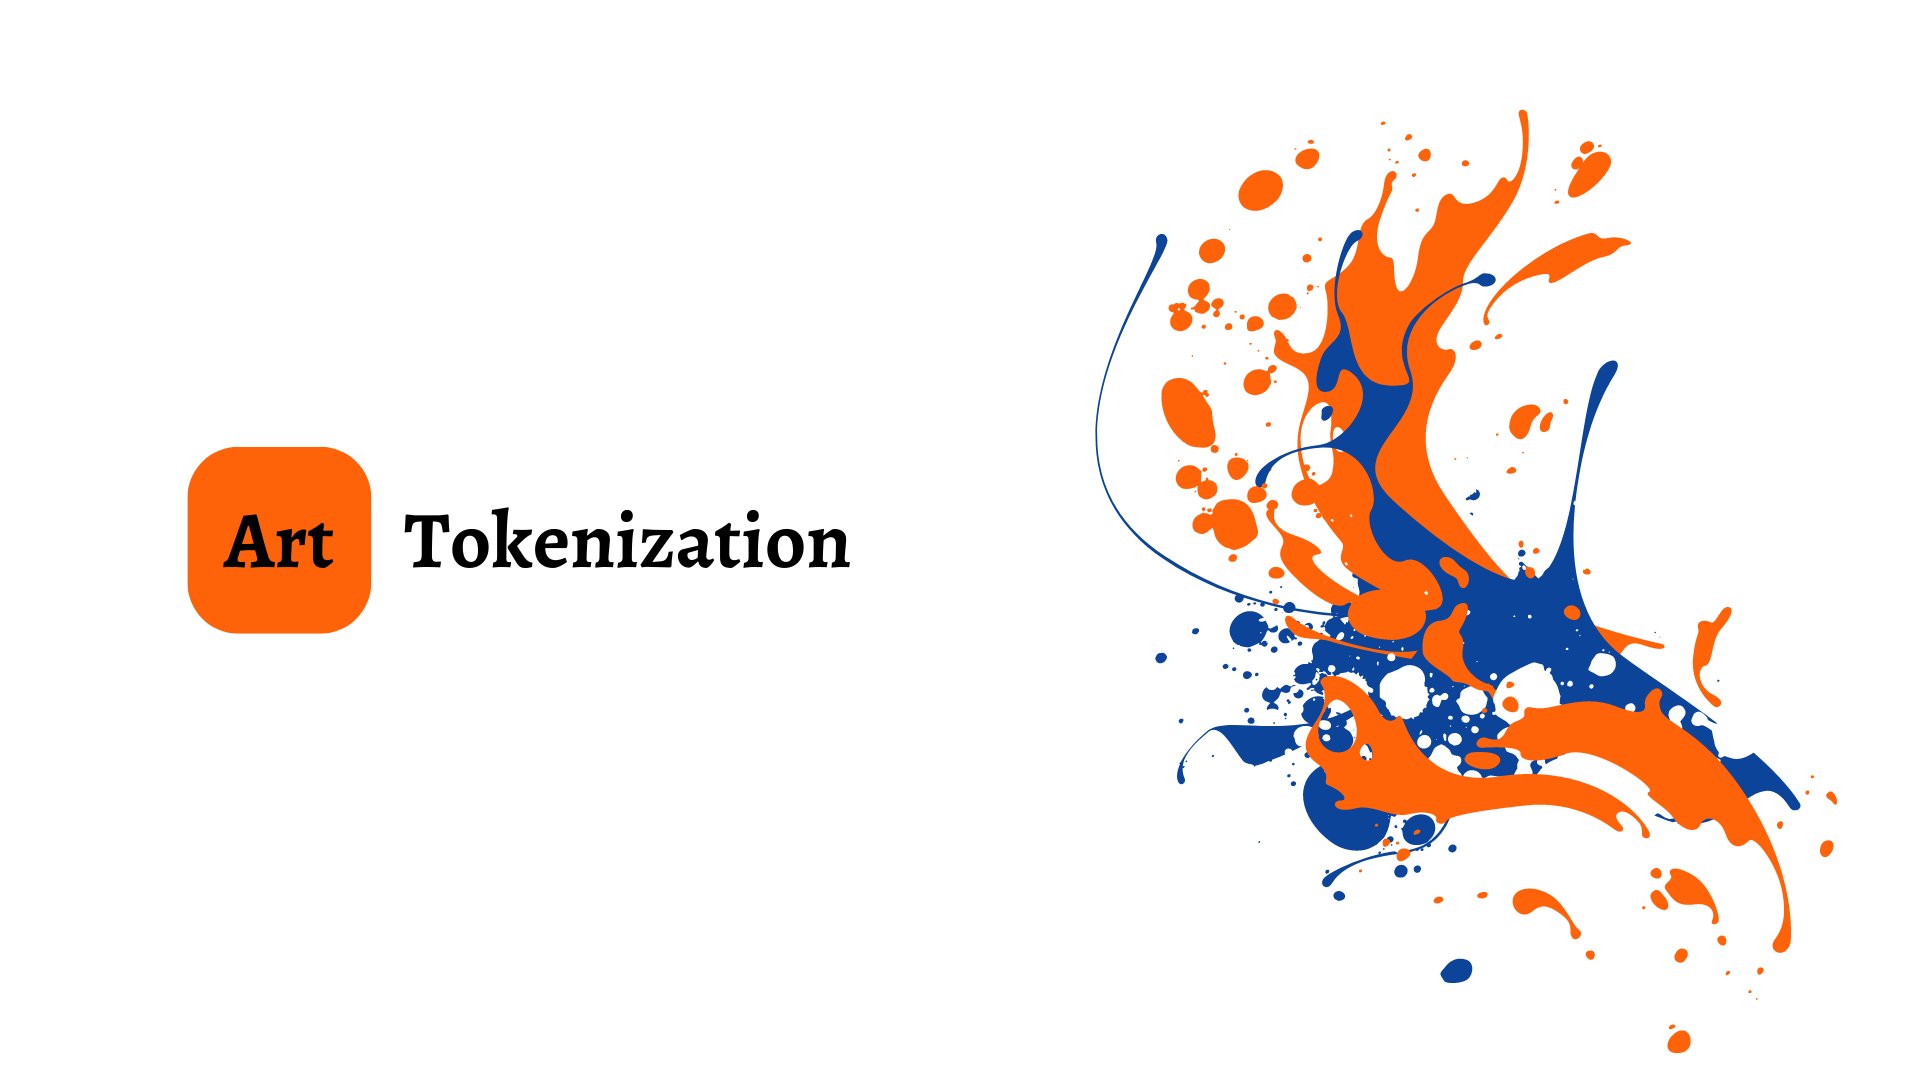 Develop your own “state of the art” art tokenization platform for a rewarding business venture in the Web3 space